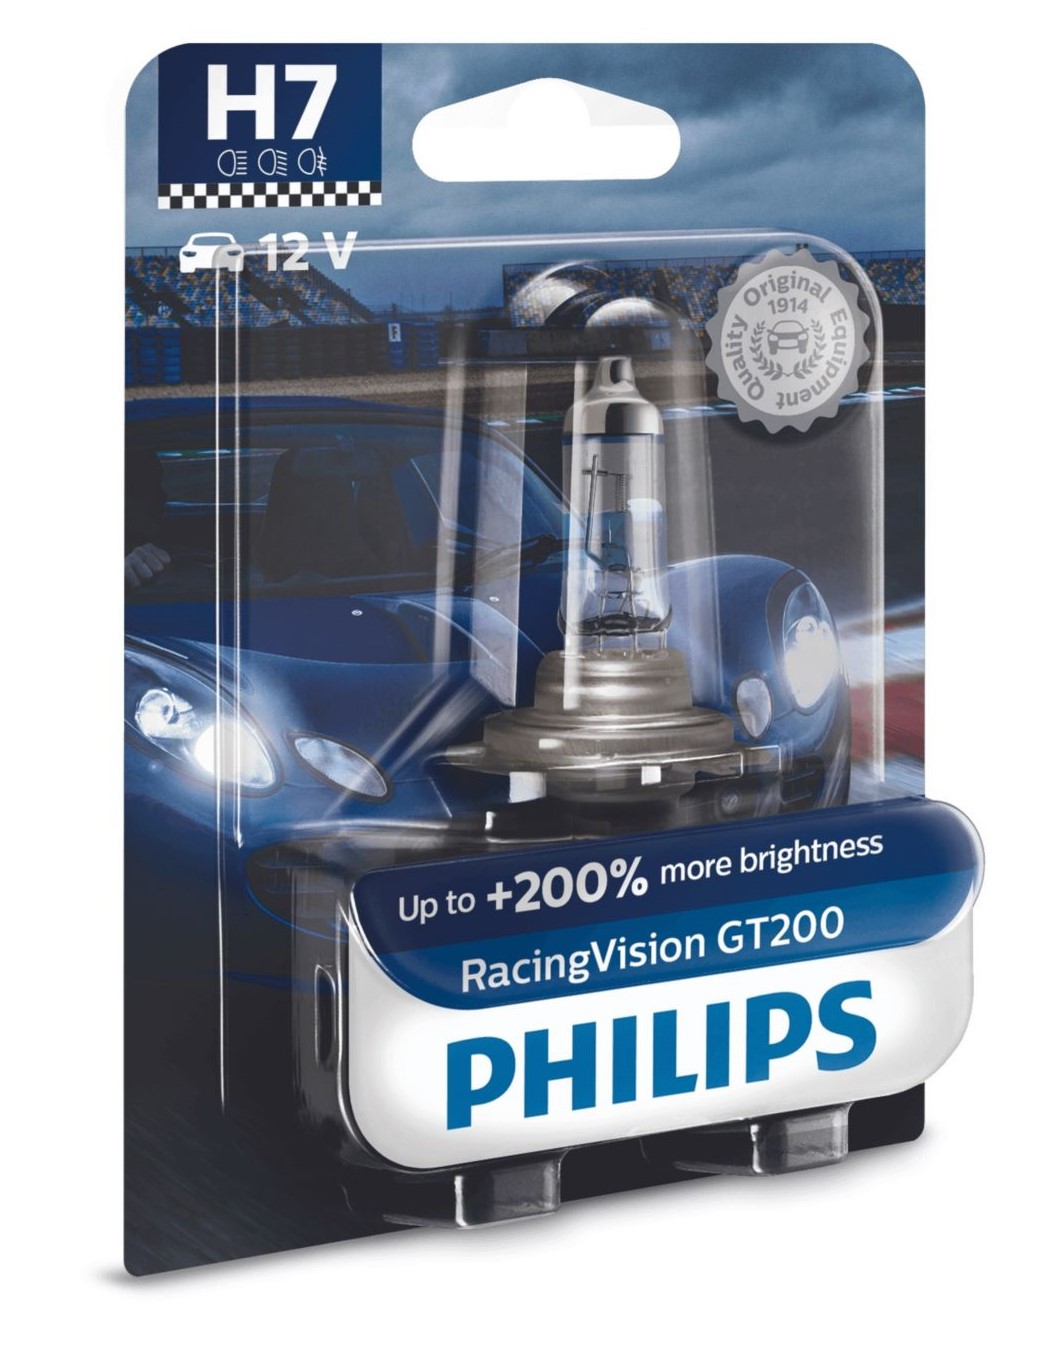 Philips X-tremeVision, RacingVision, WhiteVision, WhiteVision